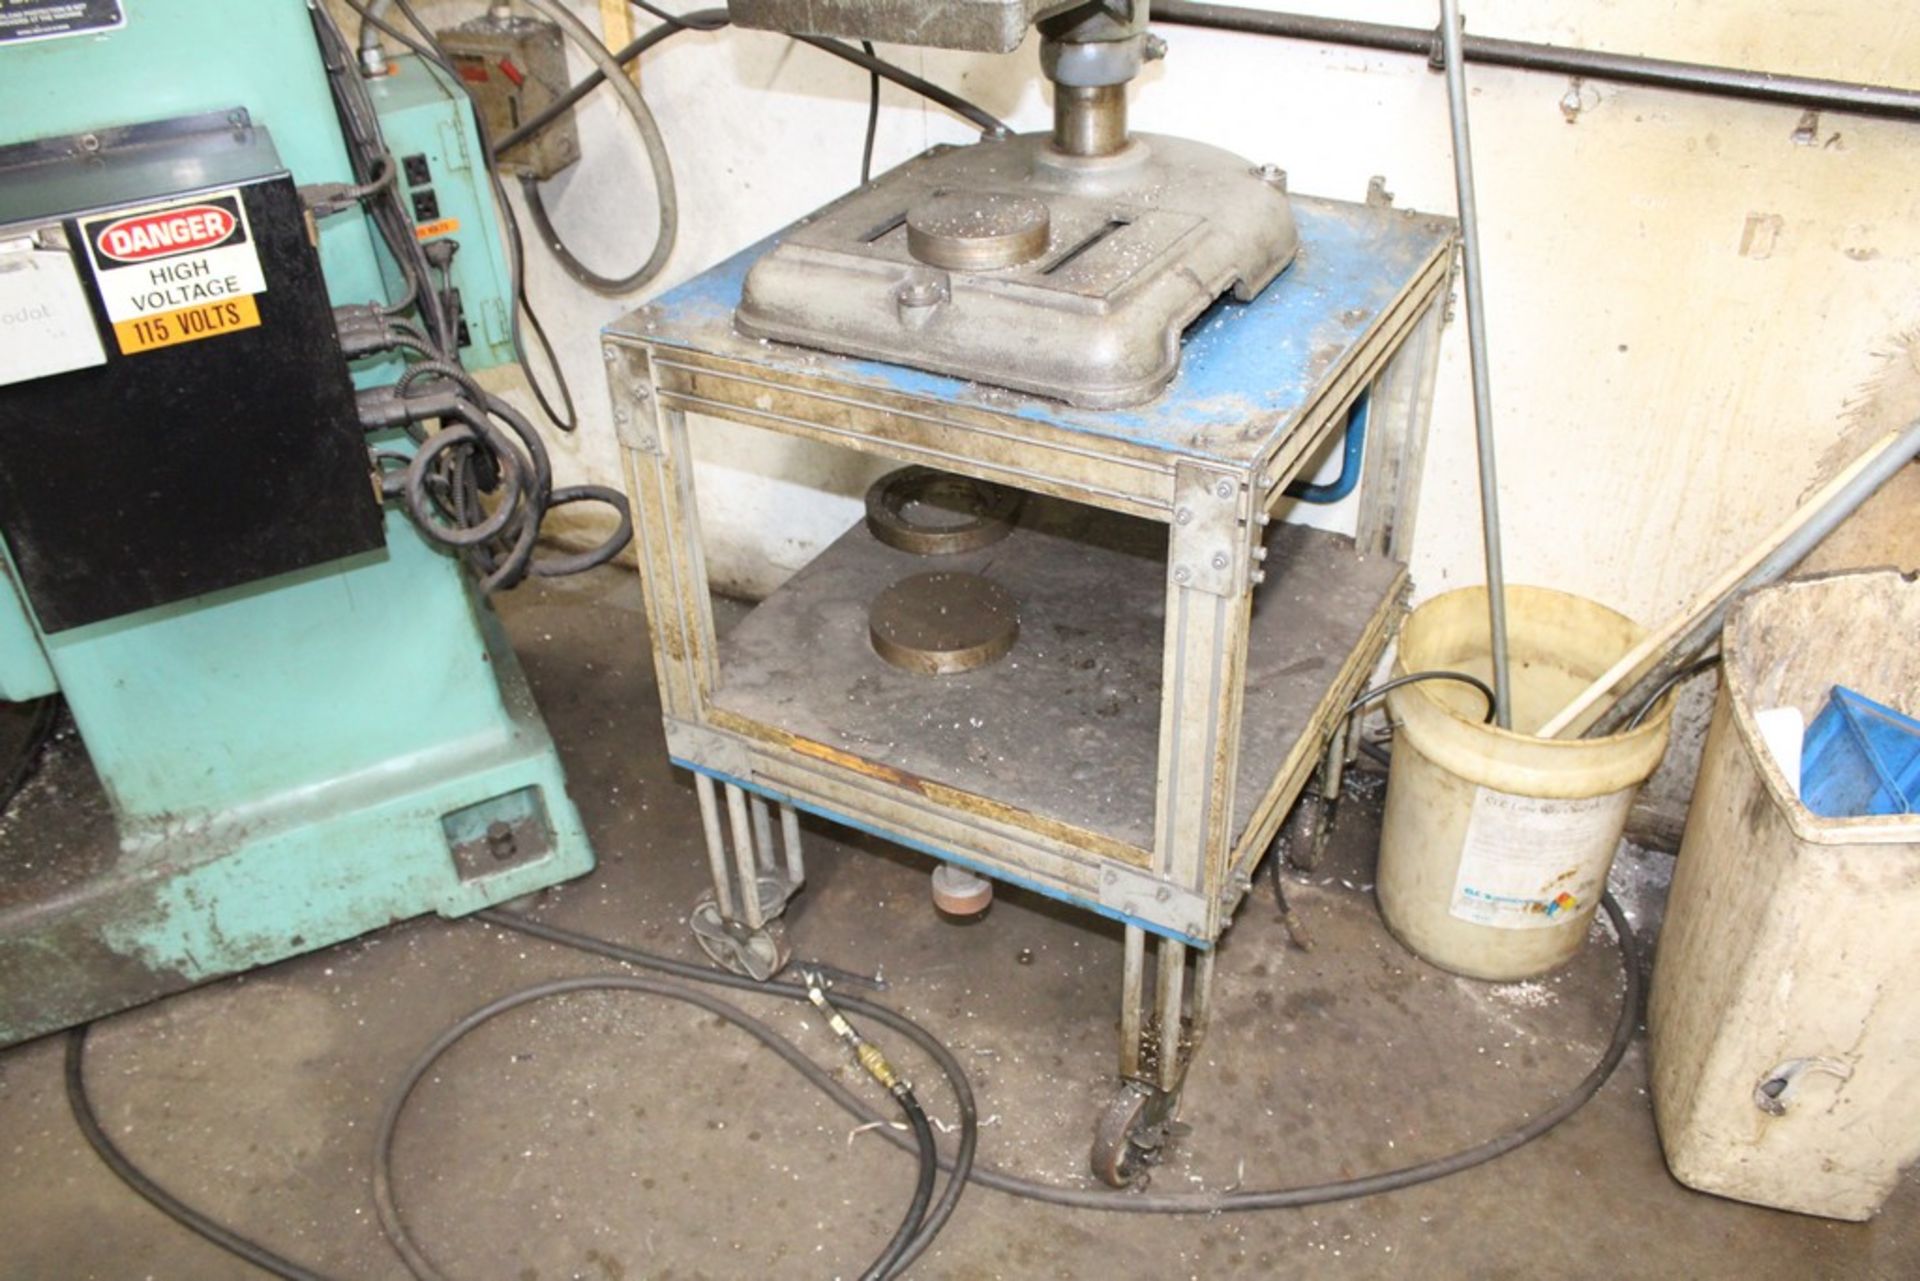 DELTA ROCKWELL 15" BENCH TOP DRILL PRESS WITH CART - Image 5 of 5